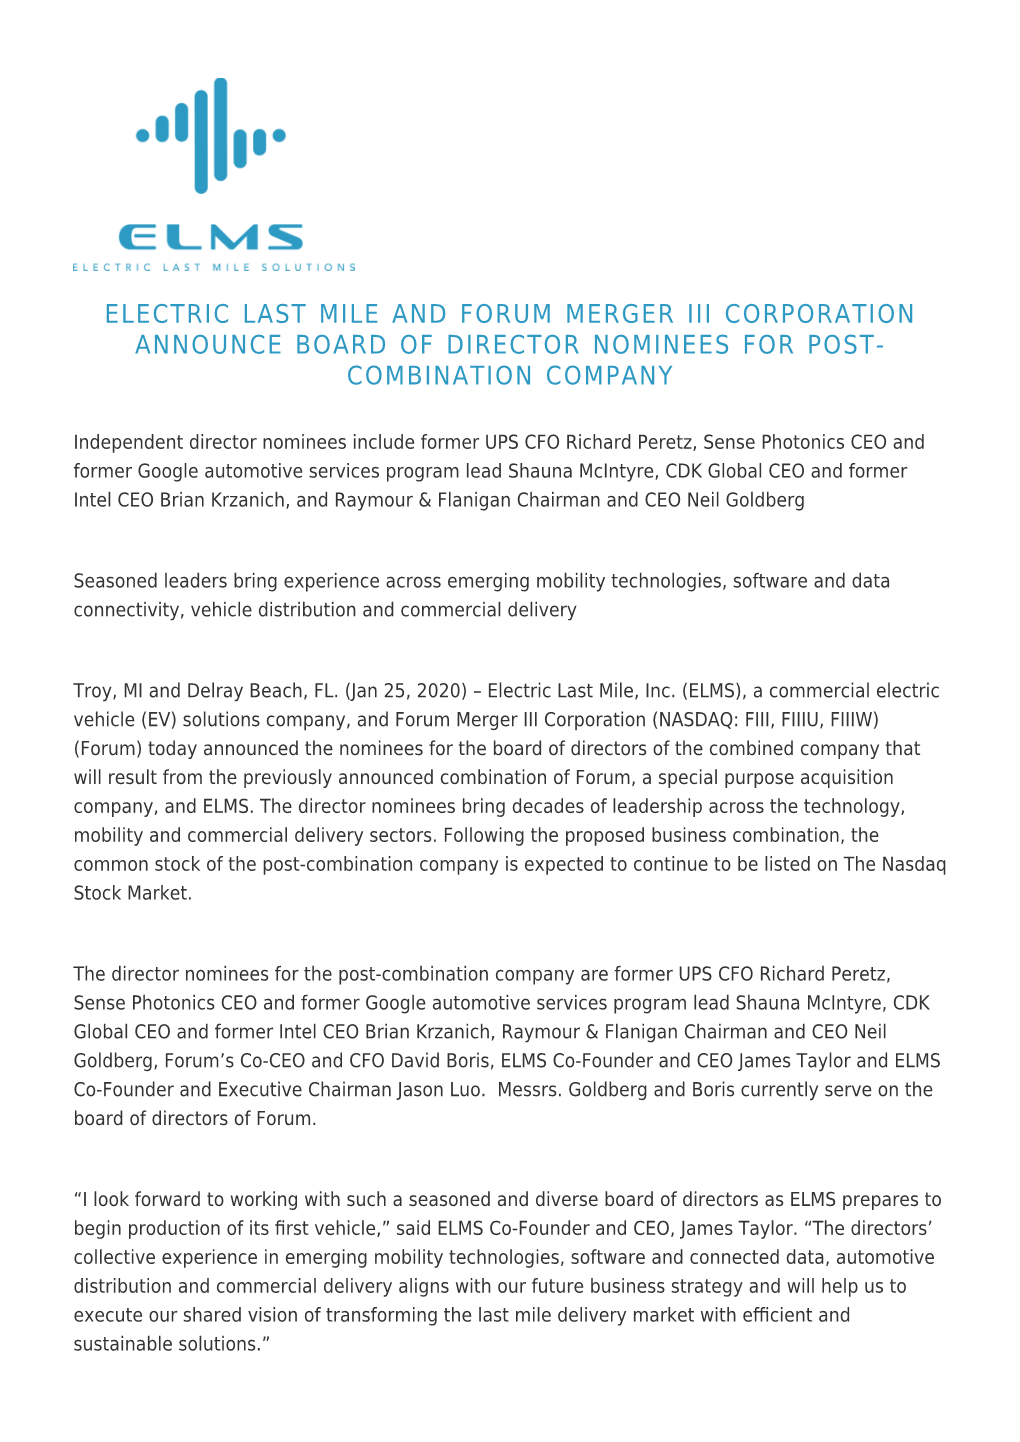 Electric Last Mile and Forum Merger III Corporation Announce Board of Director Nominees for Post-Combination Company